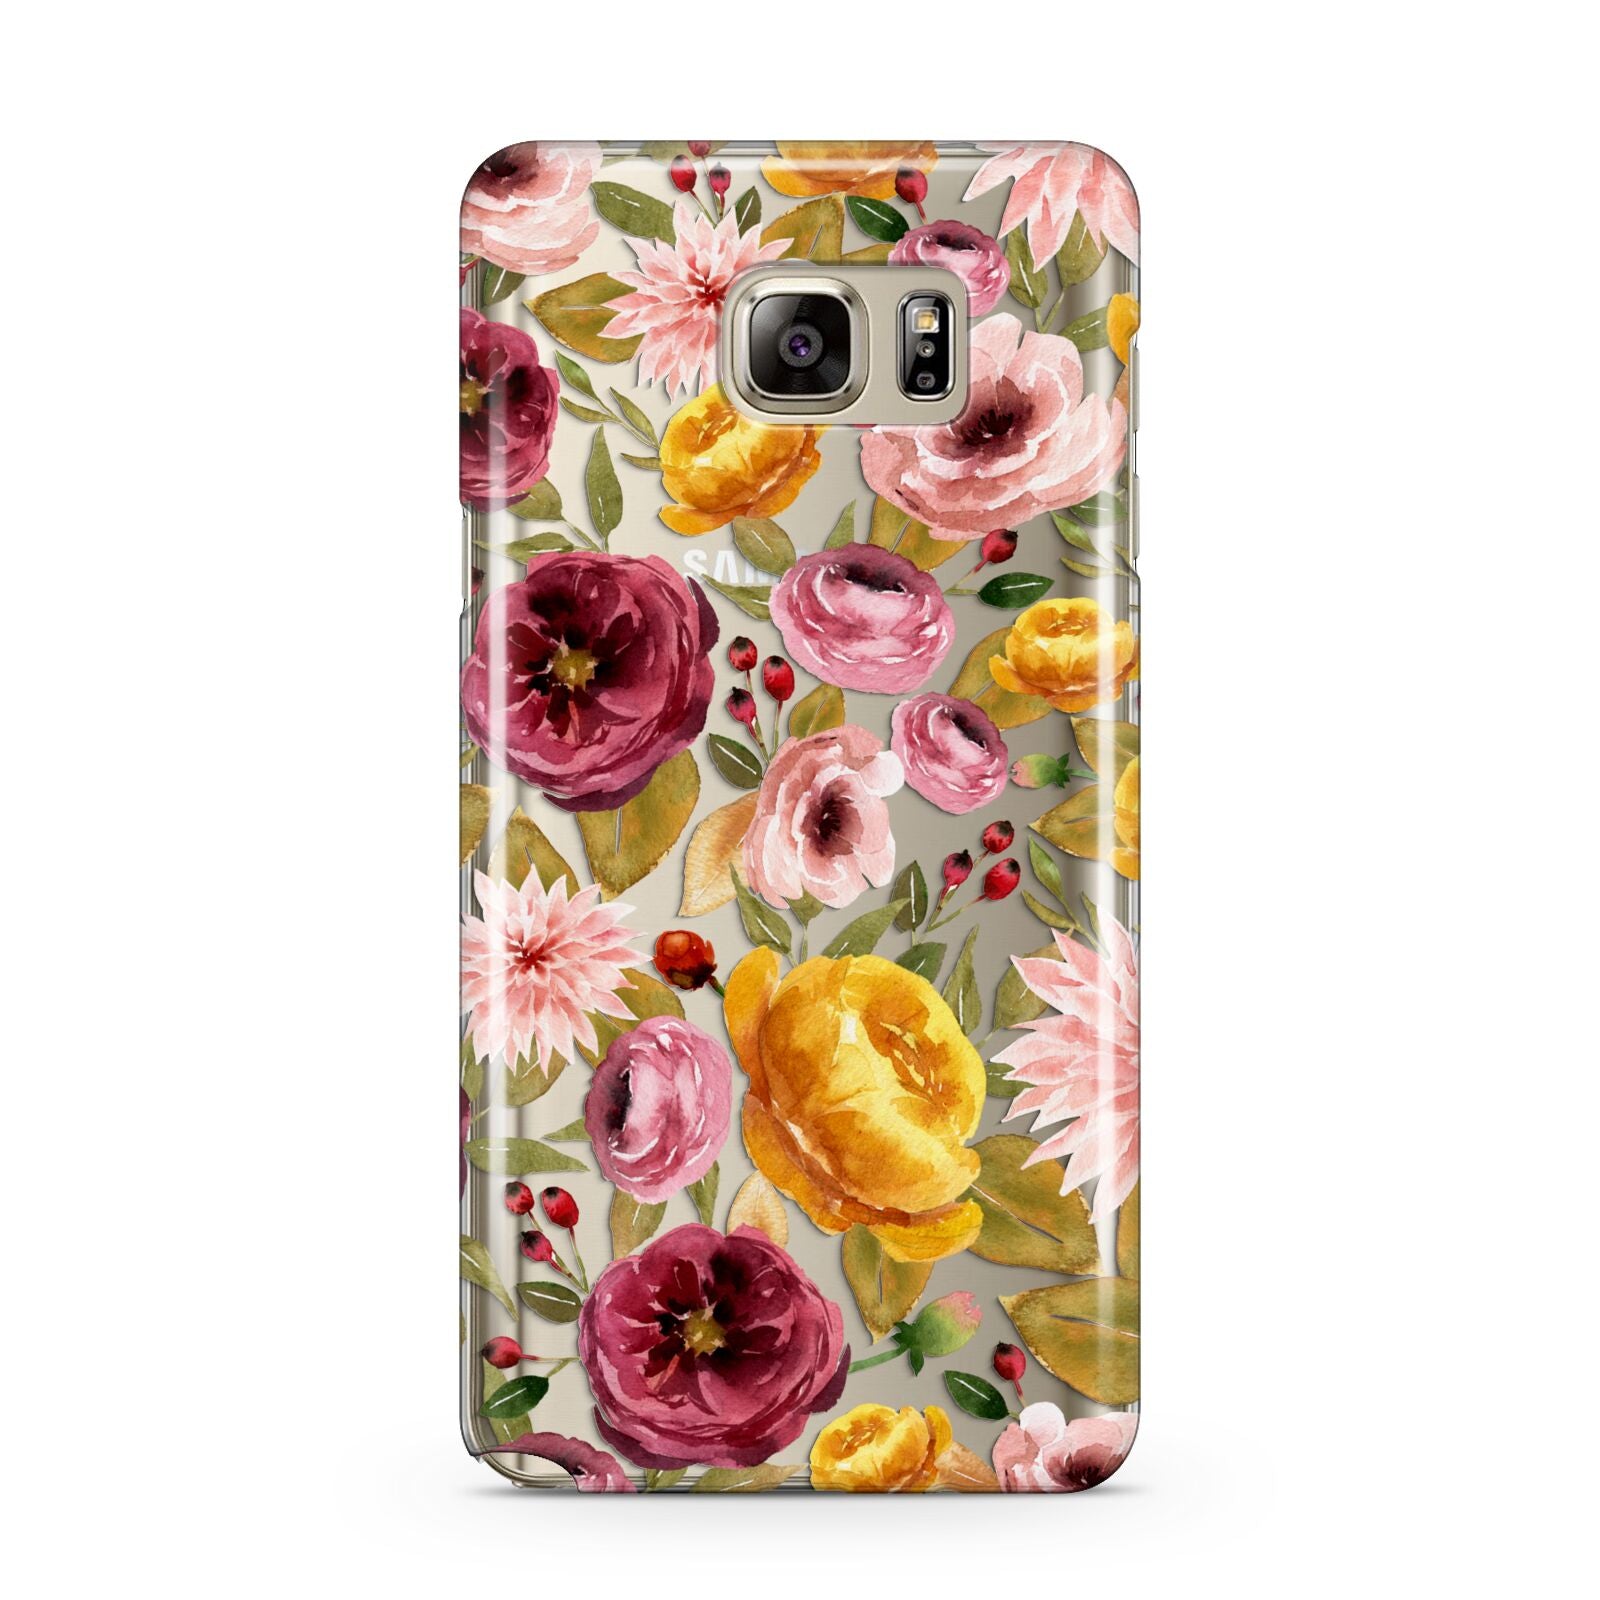 Pink and Mustard Floral Samsung Galaxy Note 5 Case